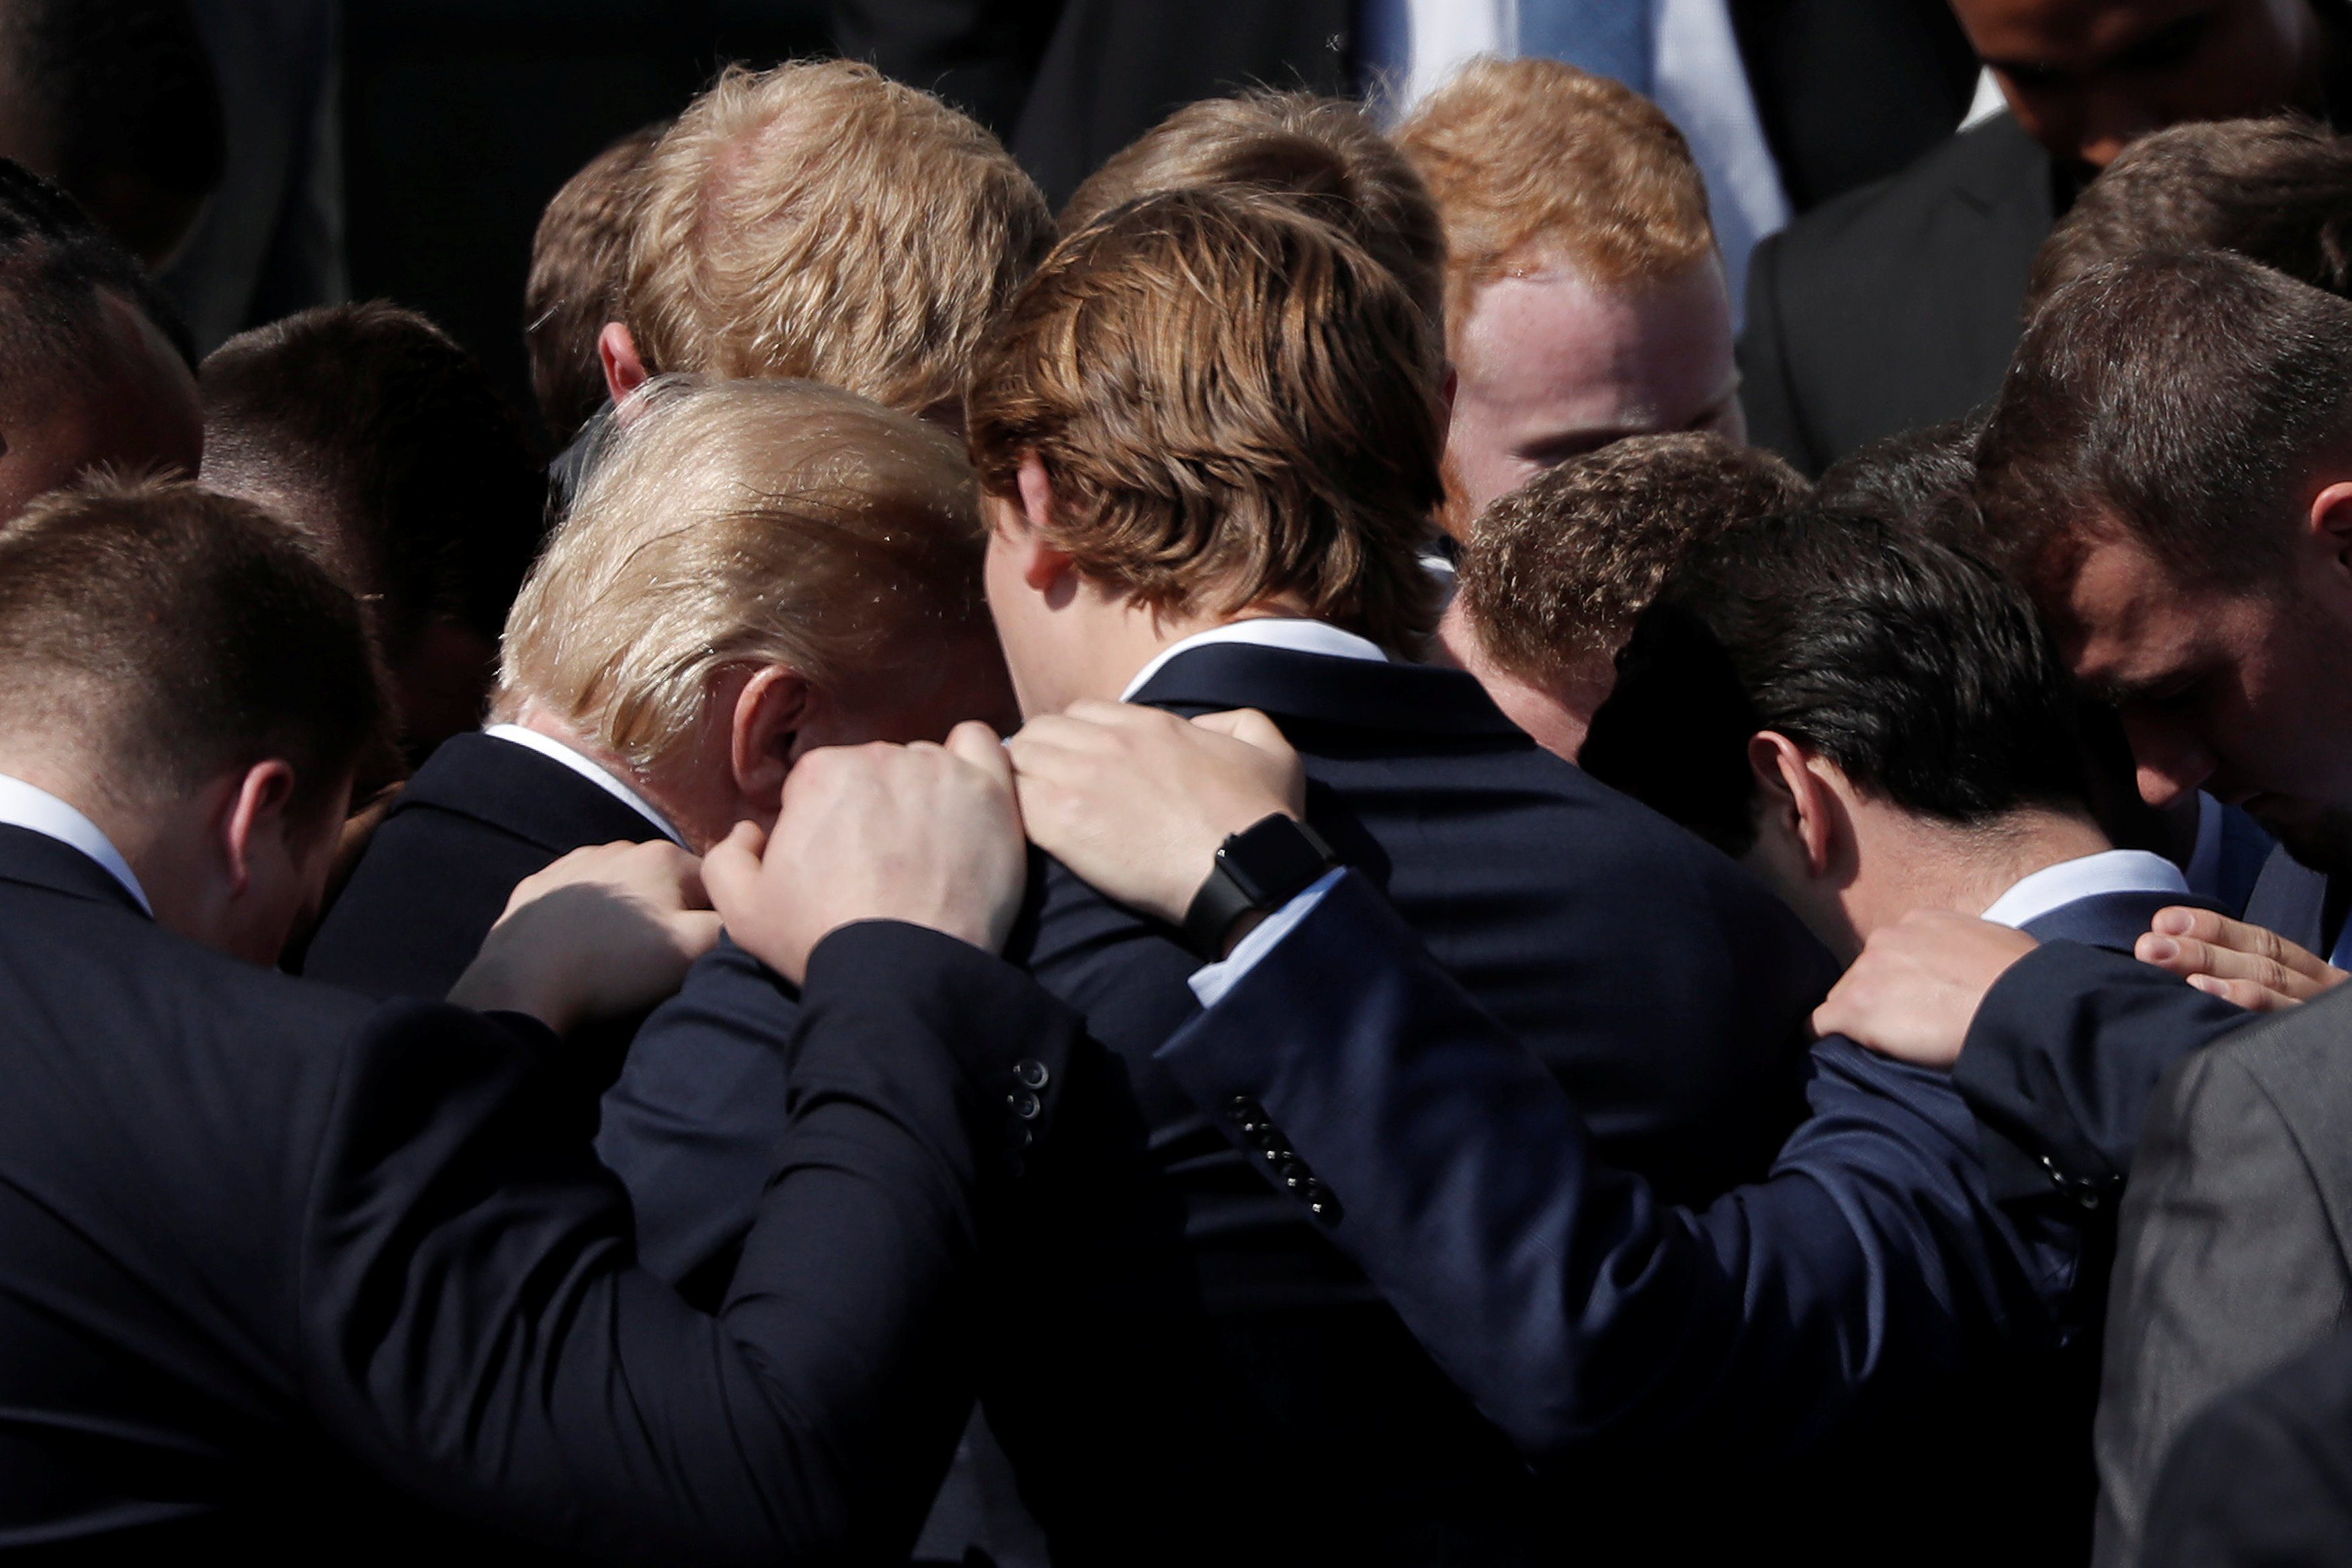 U.S. President Donald Trump prays with team members of the 2017 NCAA Football National Champions, The Alabama Crimson Tide during an event hosted at the South Lawn of the White House in Washington